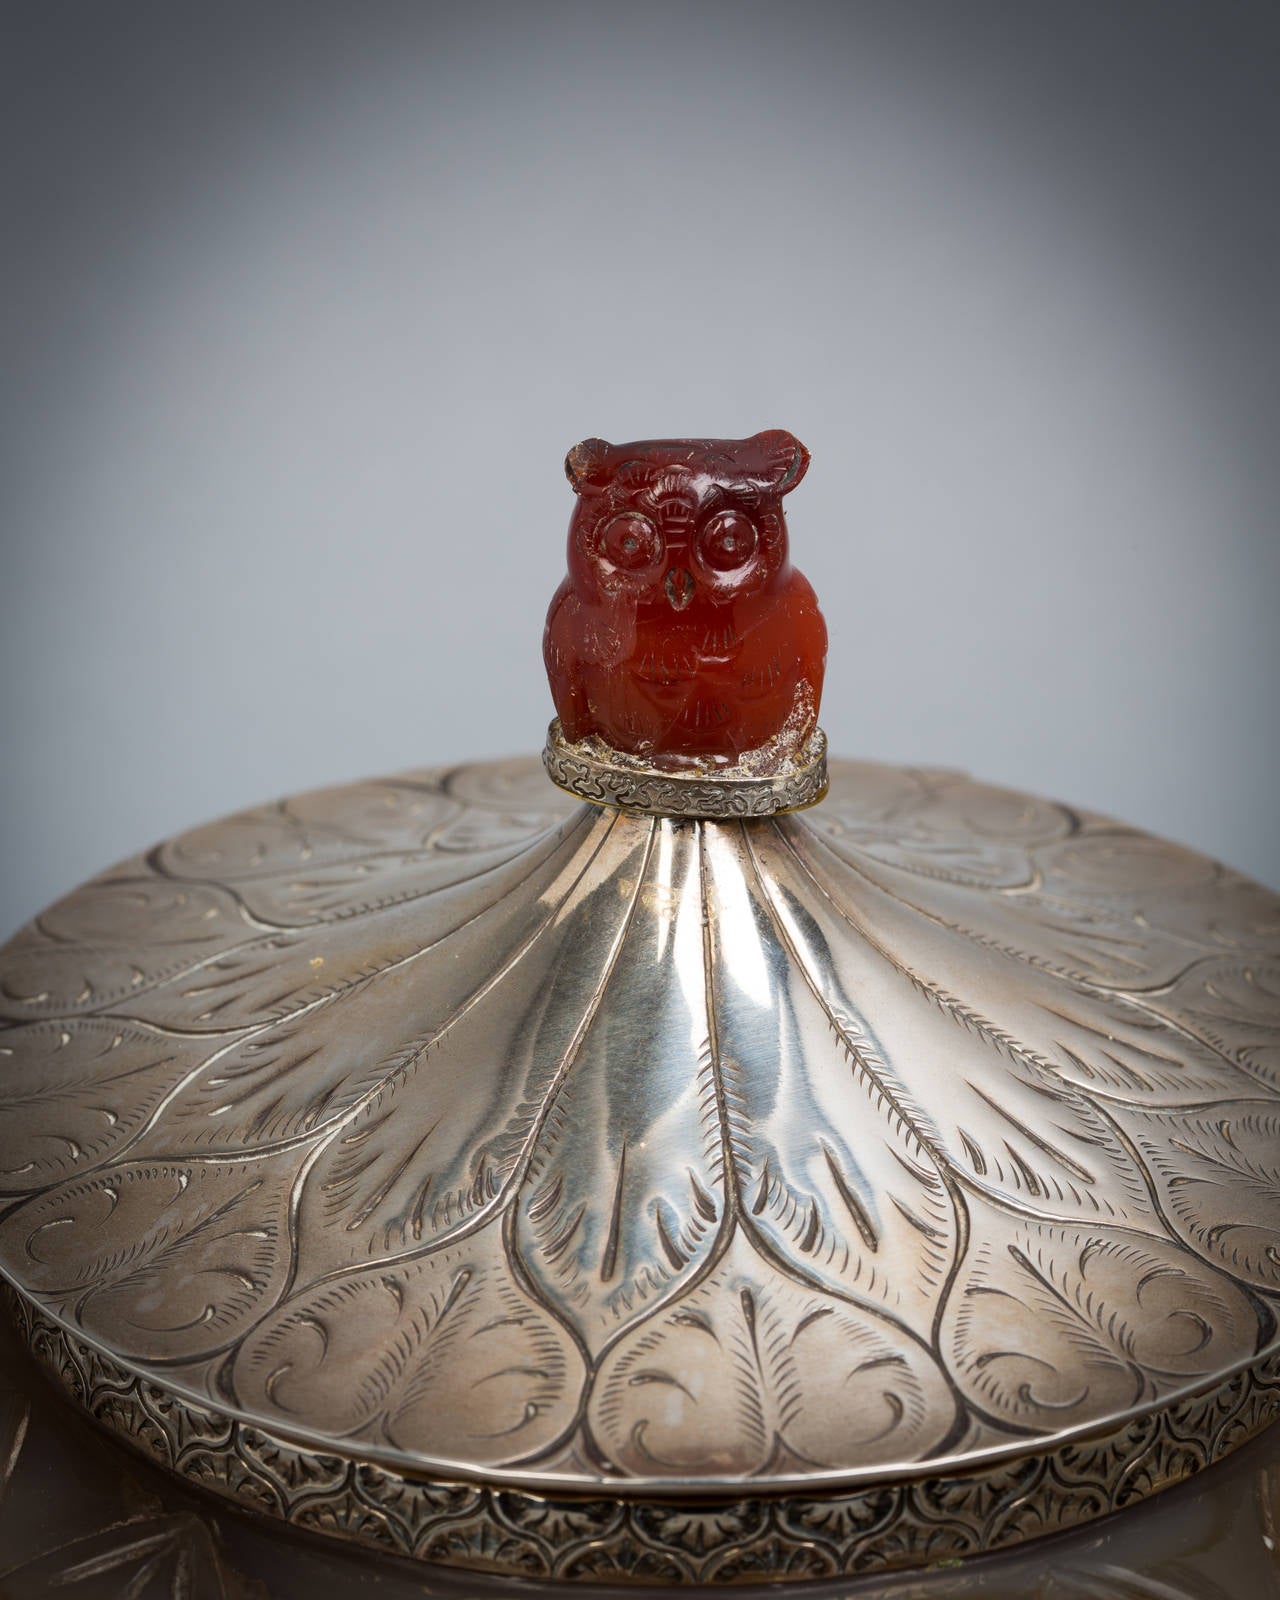 The Agate bowl is 18th century. This Chinese agate bowl was converted into a container with silver mounts and cover and a carnellion owl finial, circa 1900.

Although unmarked, we attribute the work as American based Upon the gauge, quality and